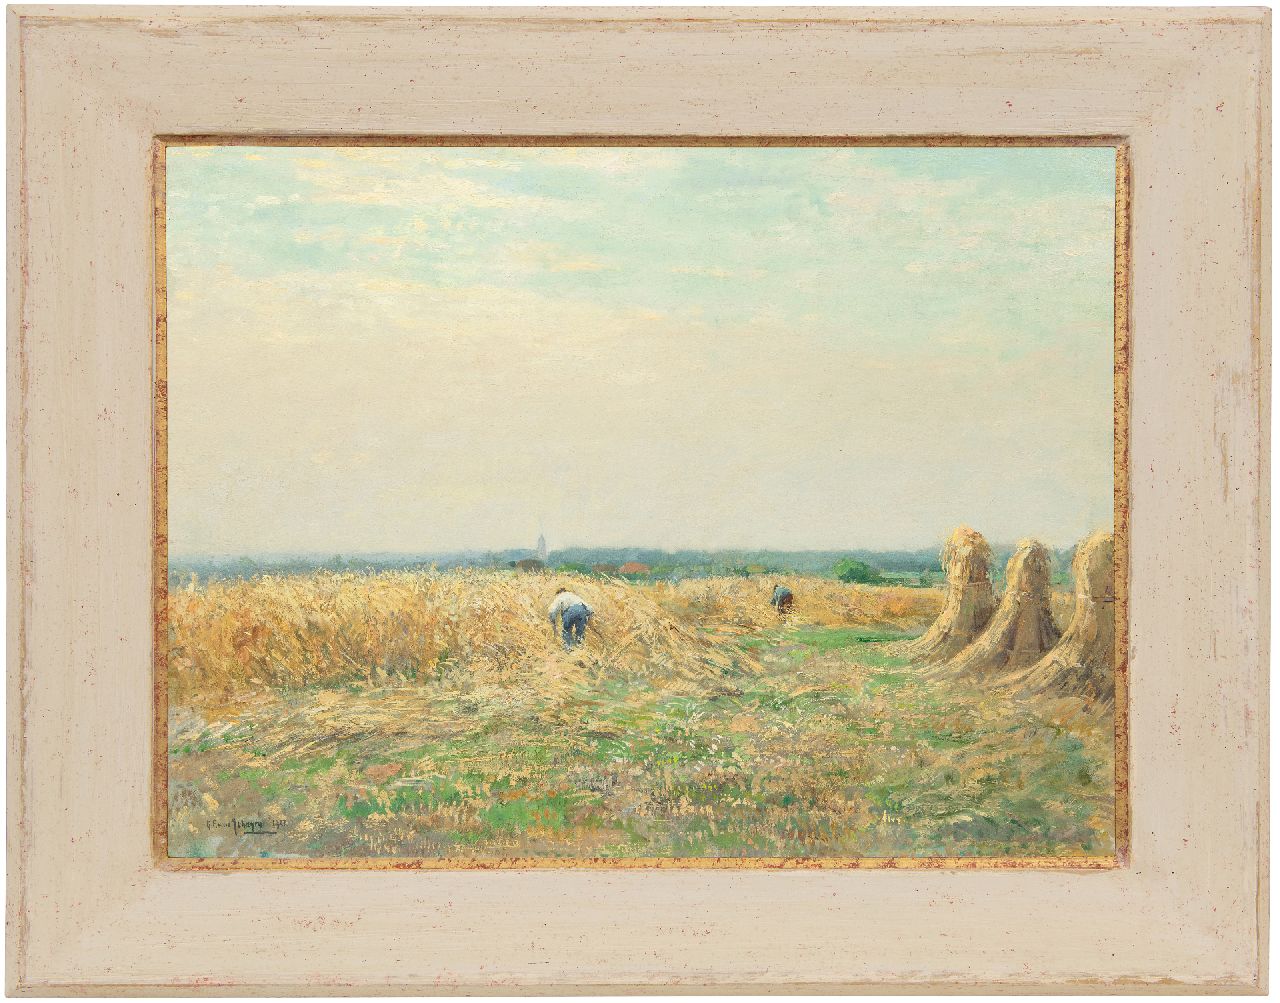 Schagen G.F. van | Gerbrand Frederik van Schagen | Paintings offered for sale | Harvest time, oil on canvas 60.5 x 80.7 cm, signed l.l. and dated 1927